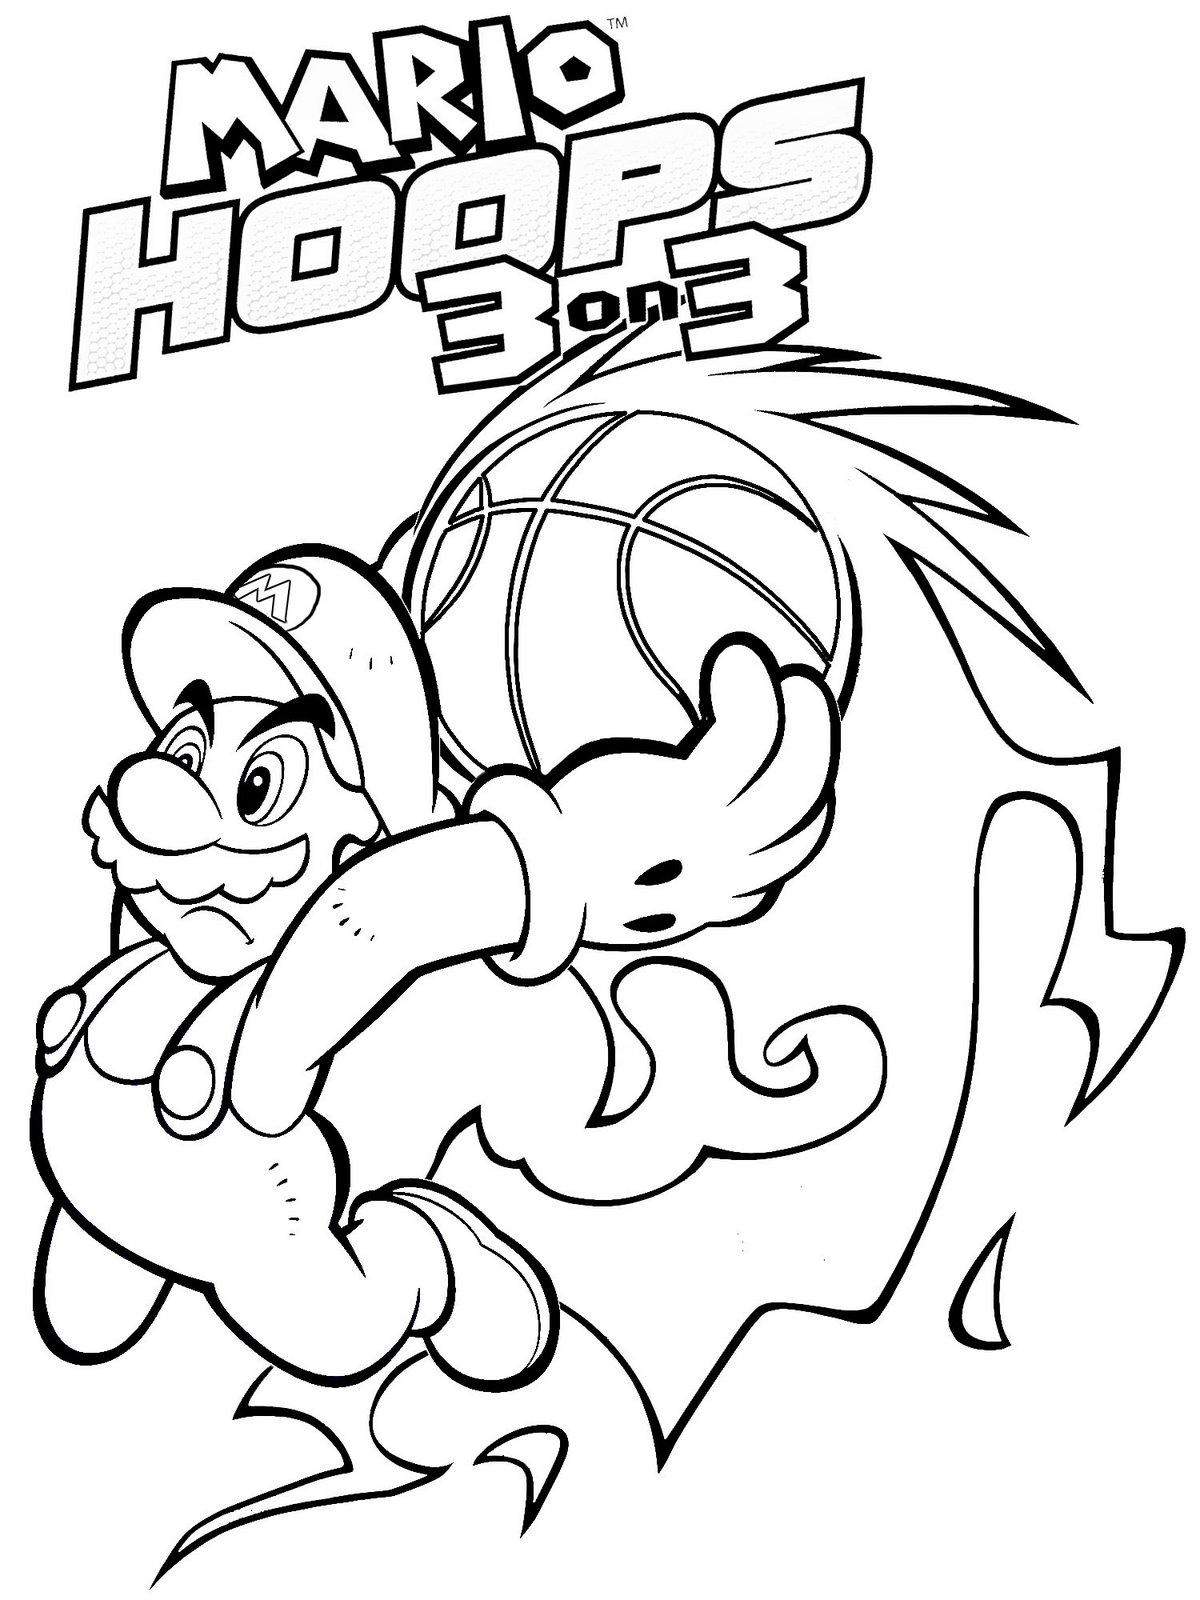 9 Free Mario Bros Coloring Pages for Kids